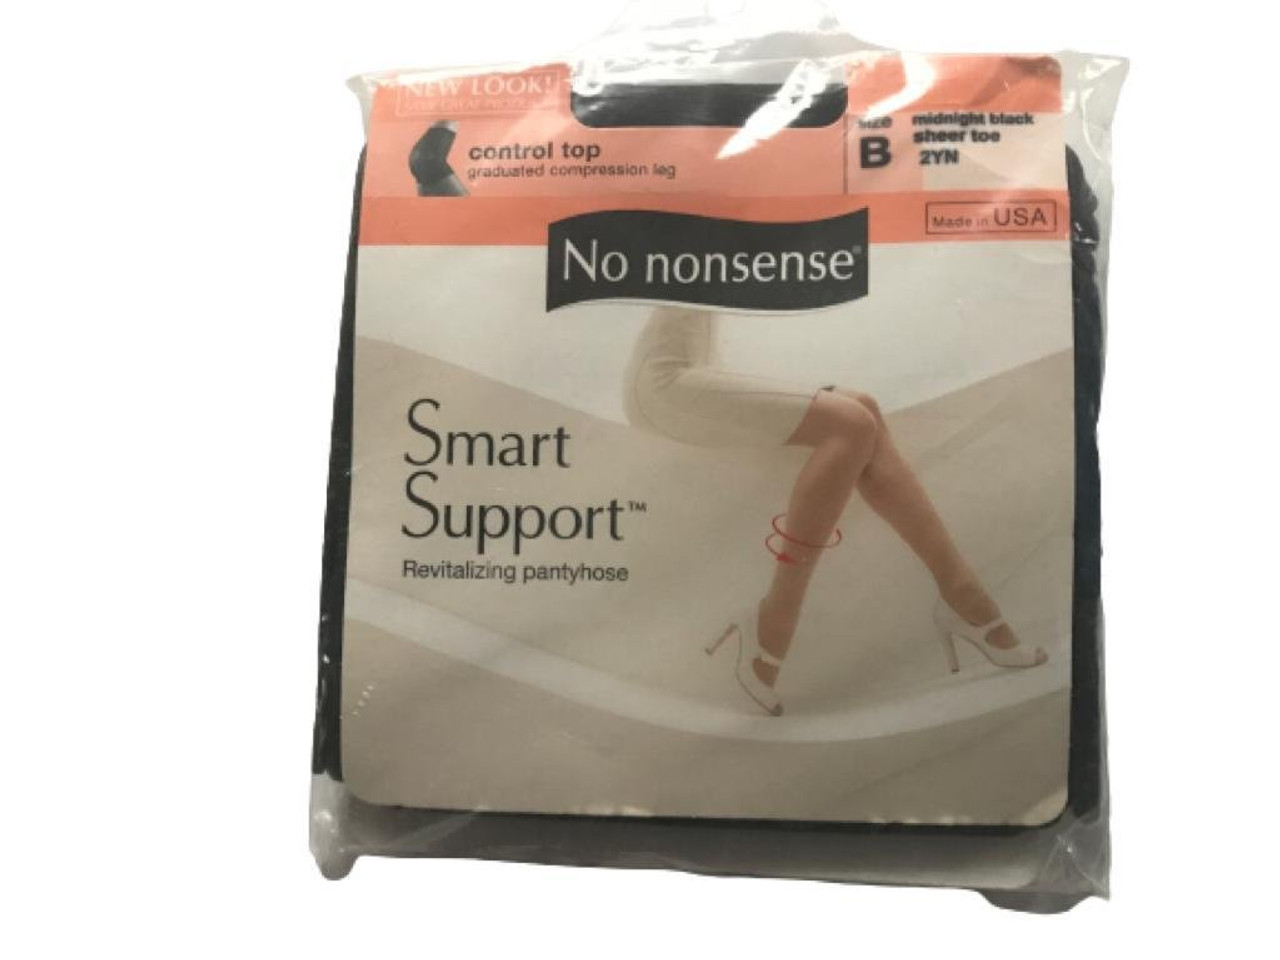 No Nonsense Control Top Smart Support Pantyhose Midnight Black Size B